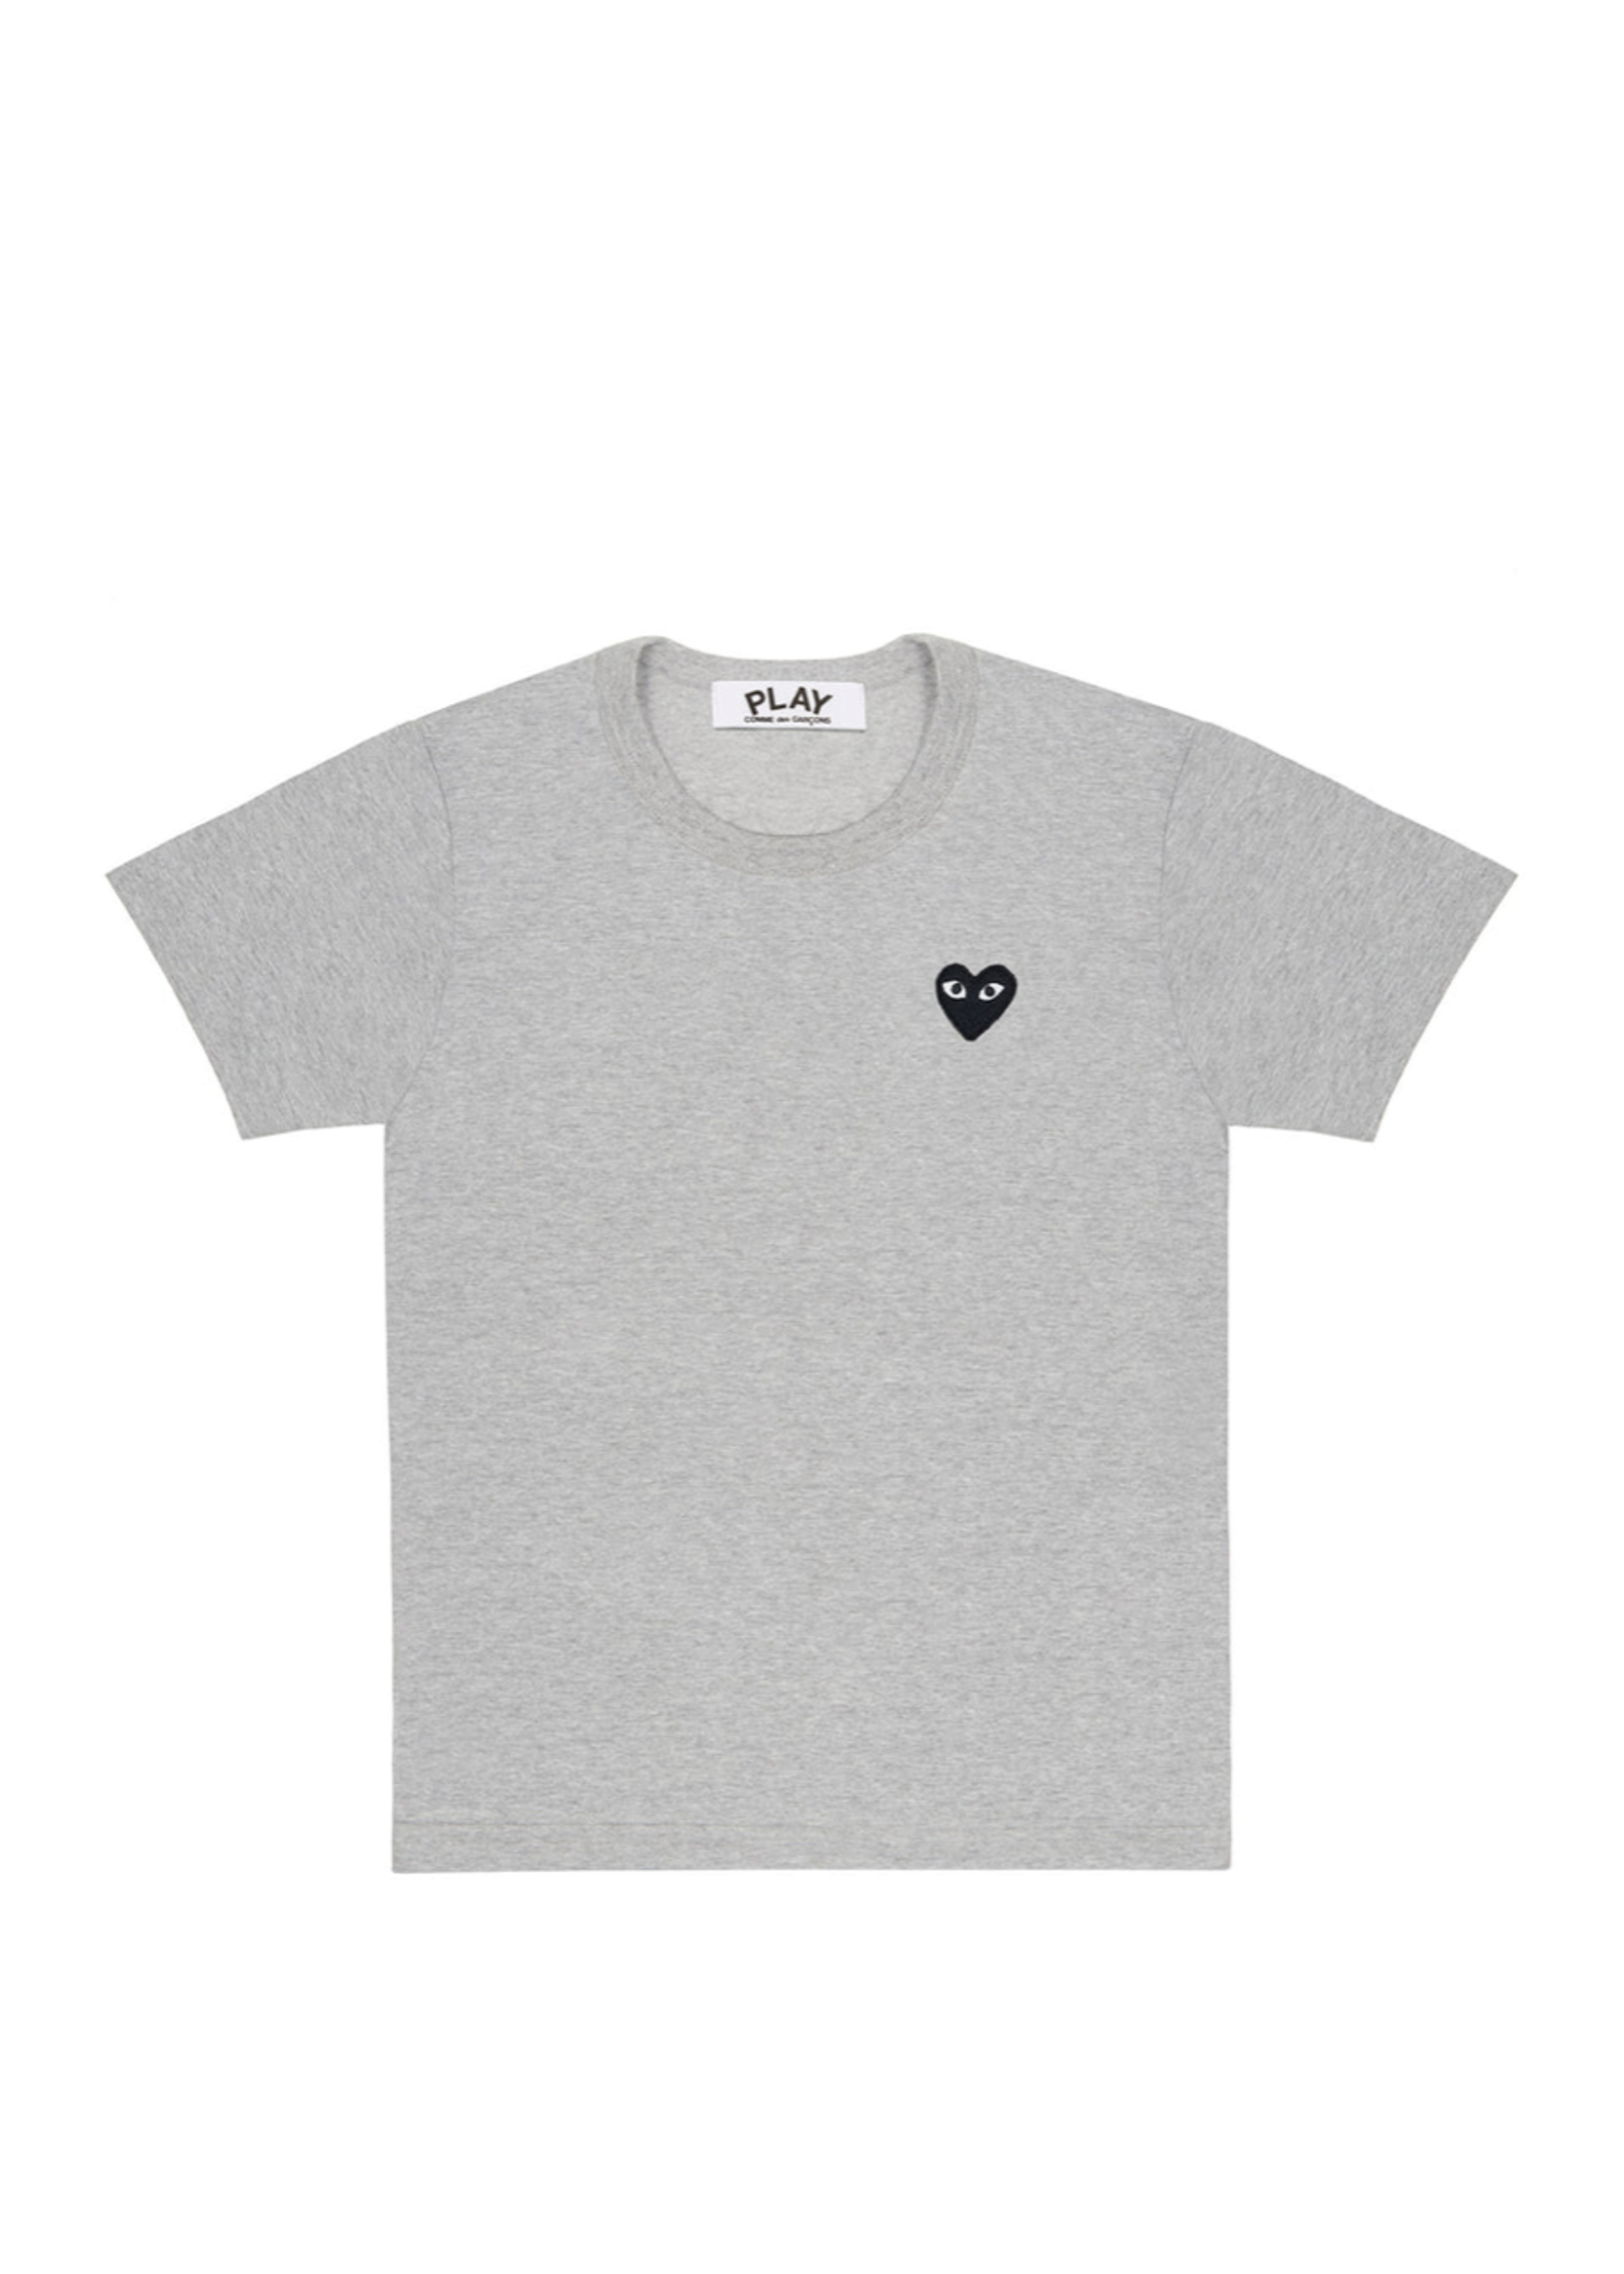 COMME des GARÇONS PLAY Heather Grey T-shirt with Small Black Heart